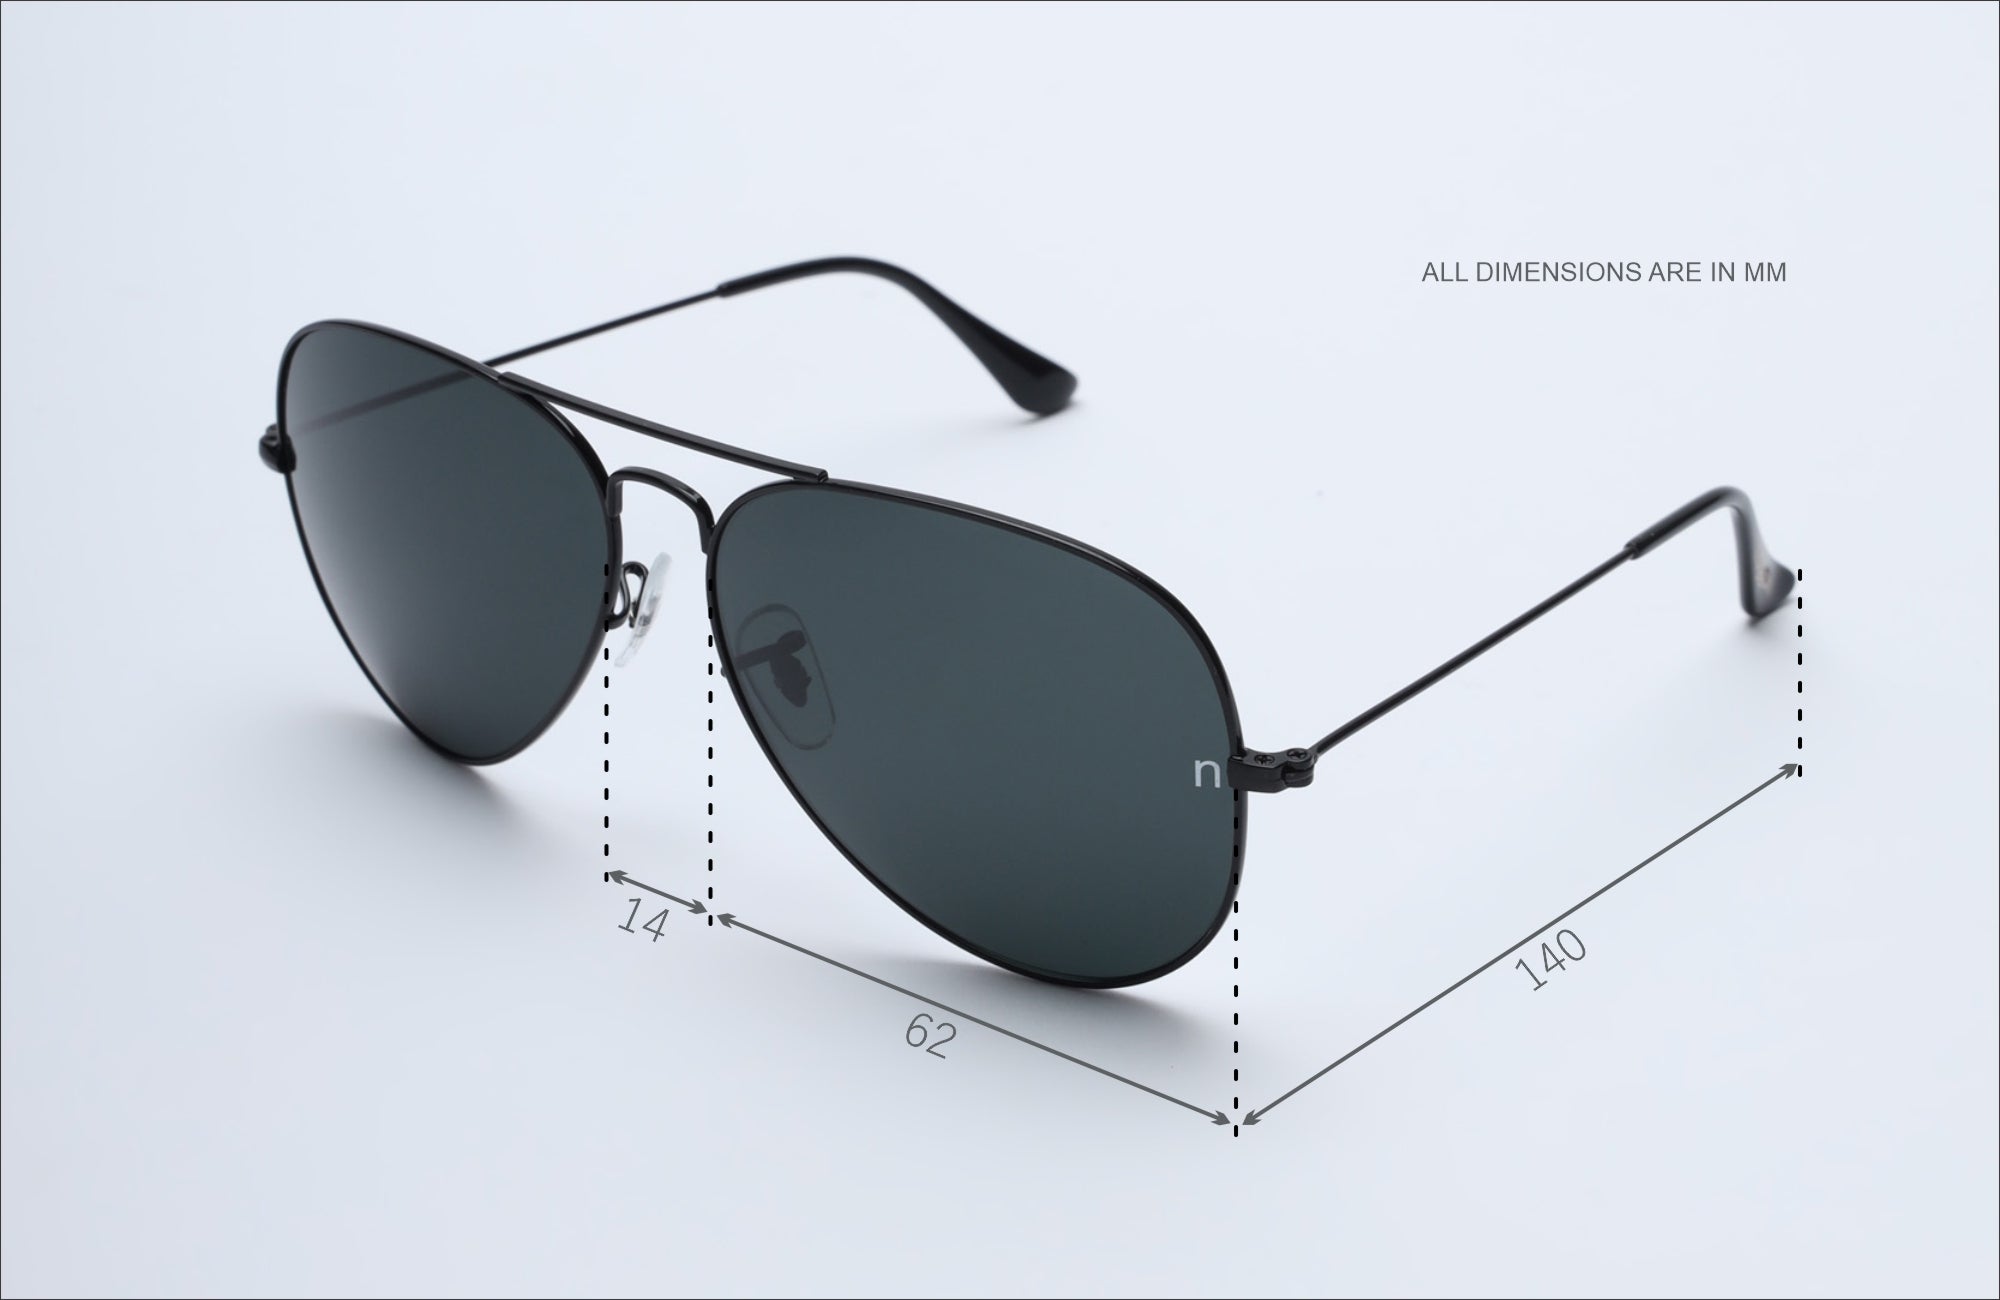 NS2002BFBL Stainless Steel Black Frame with Black Glass Lens Sunglasses